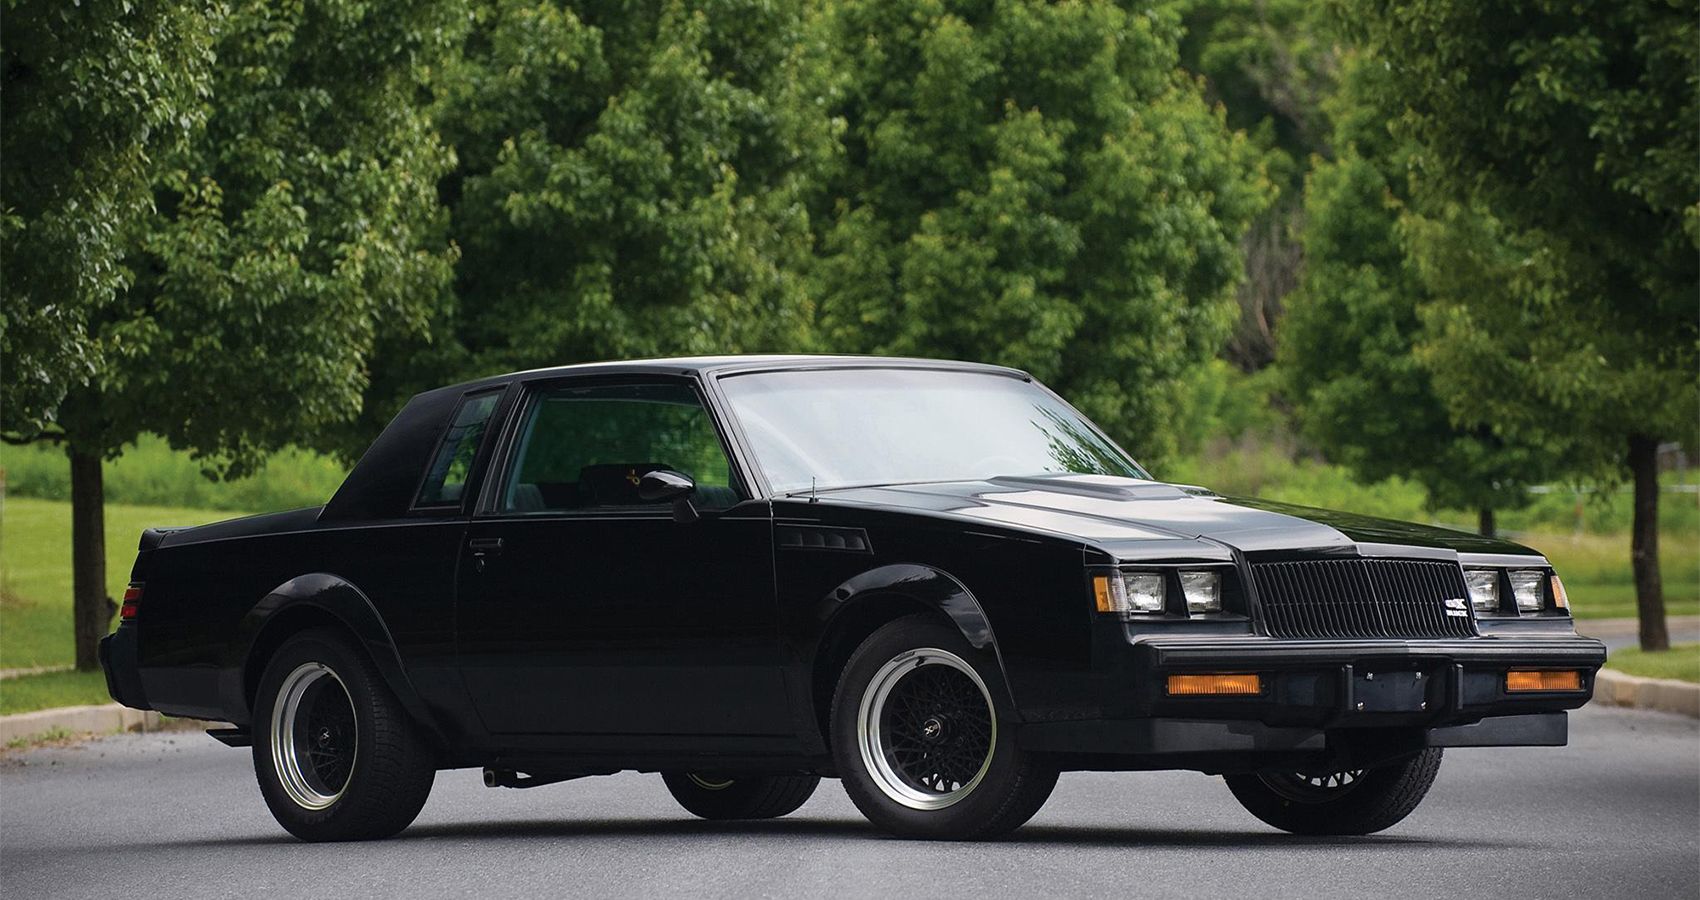 The rare and collectible Buick GNX.